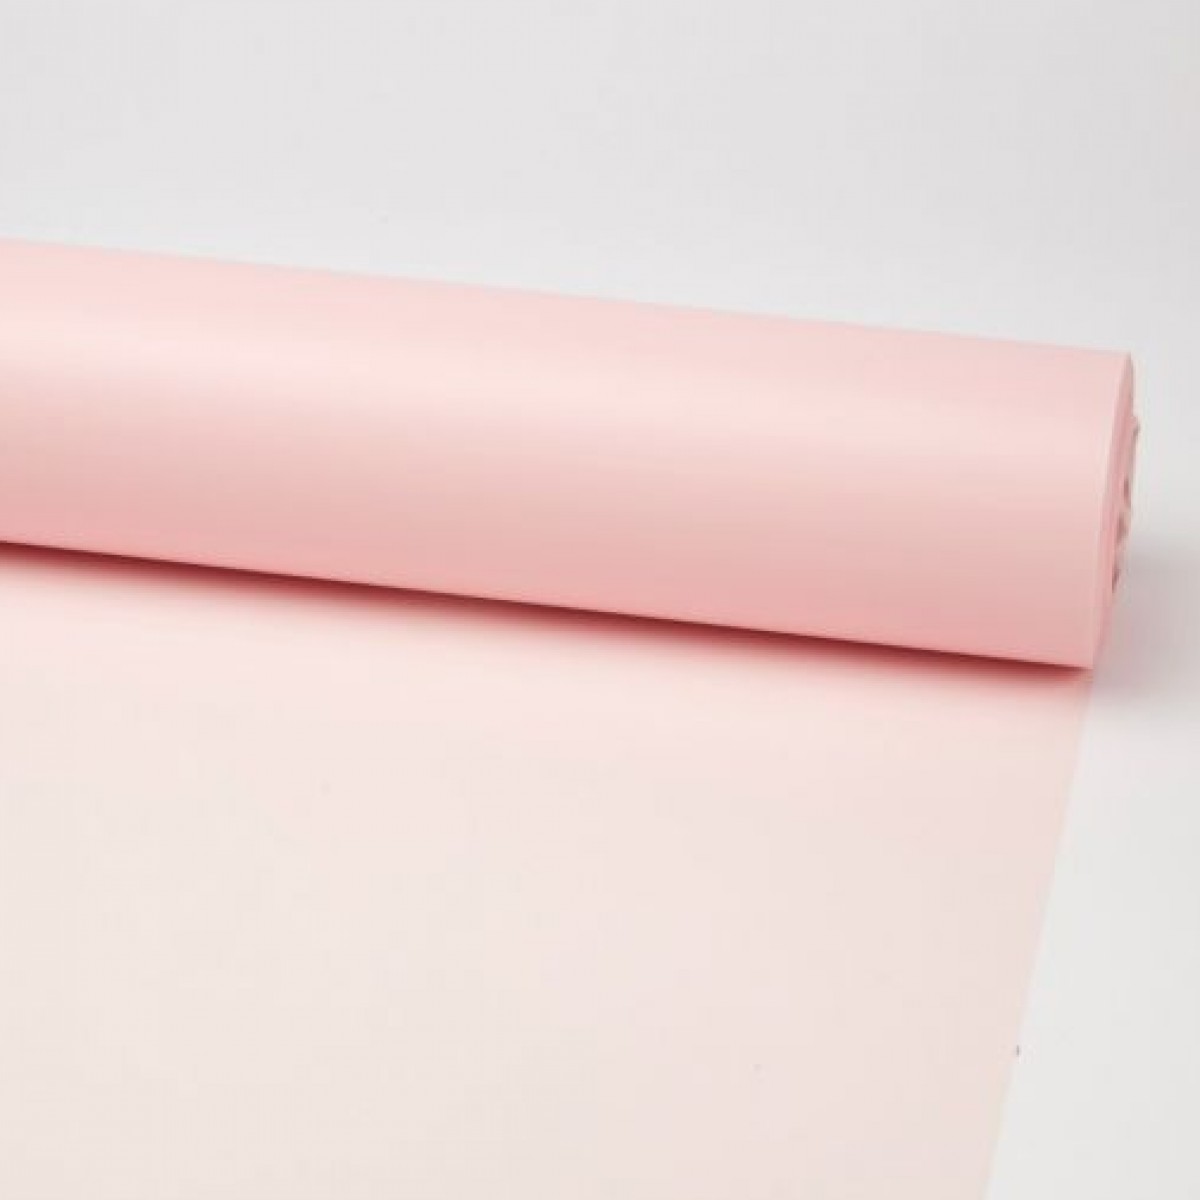 7055 Frosted Pale Pink 80cmx25m 50mic Film - 1 Roll